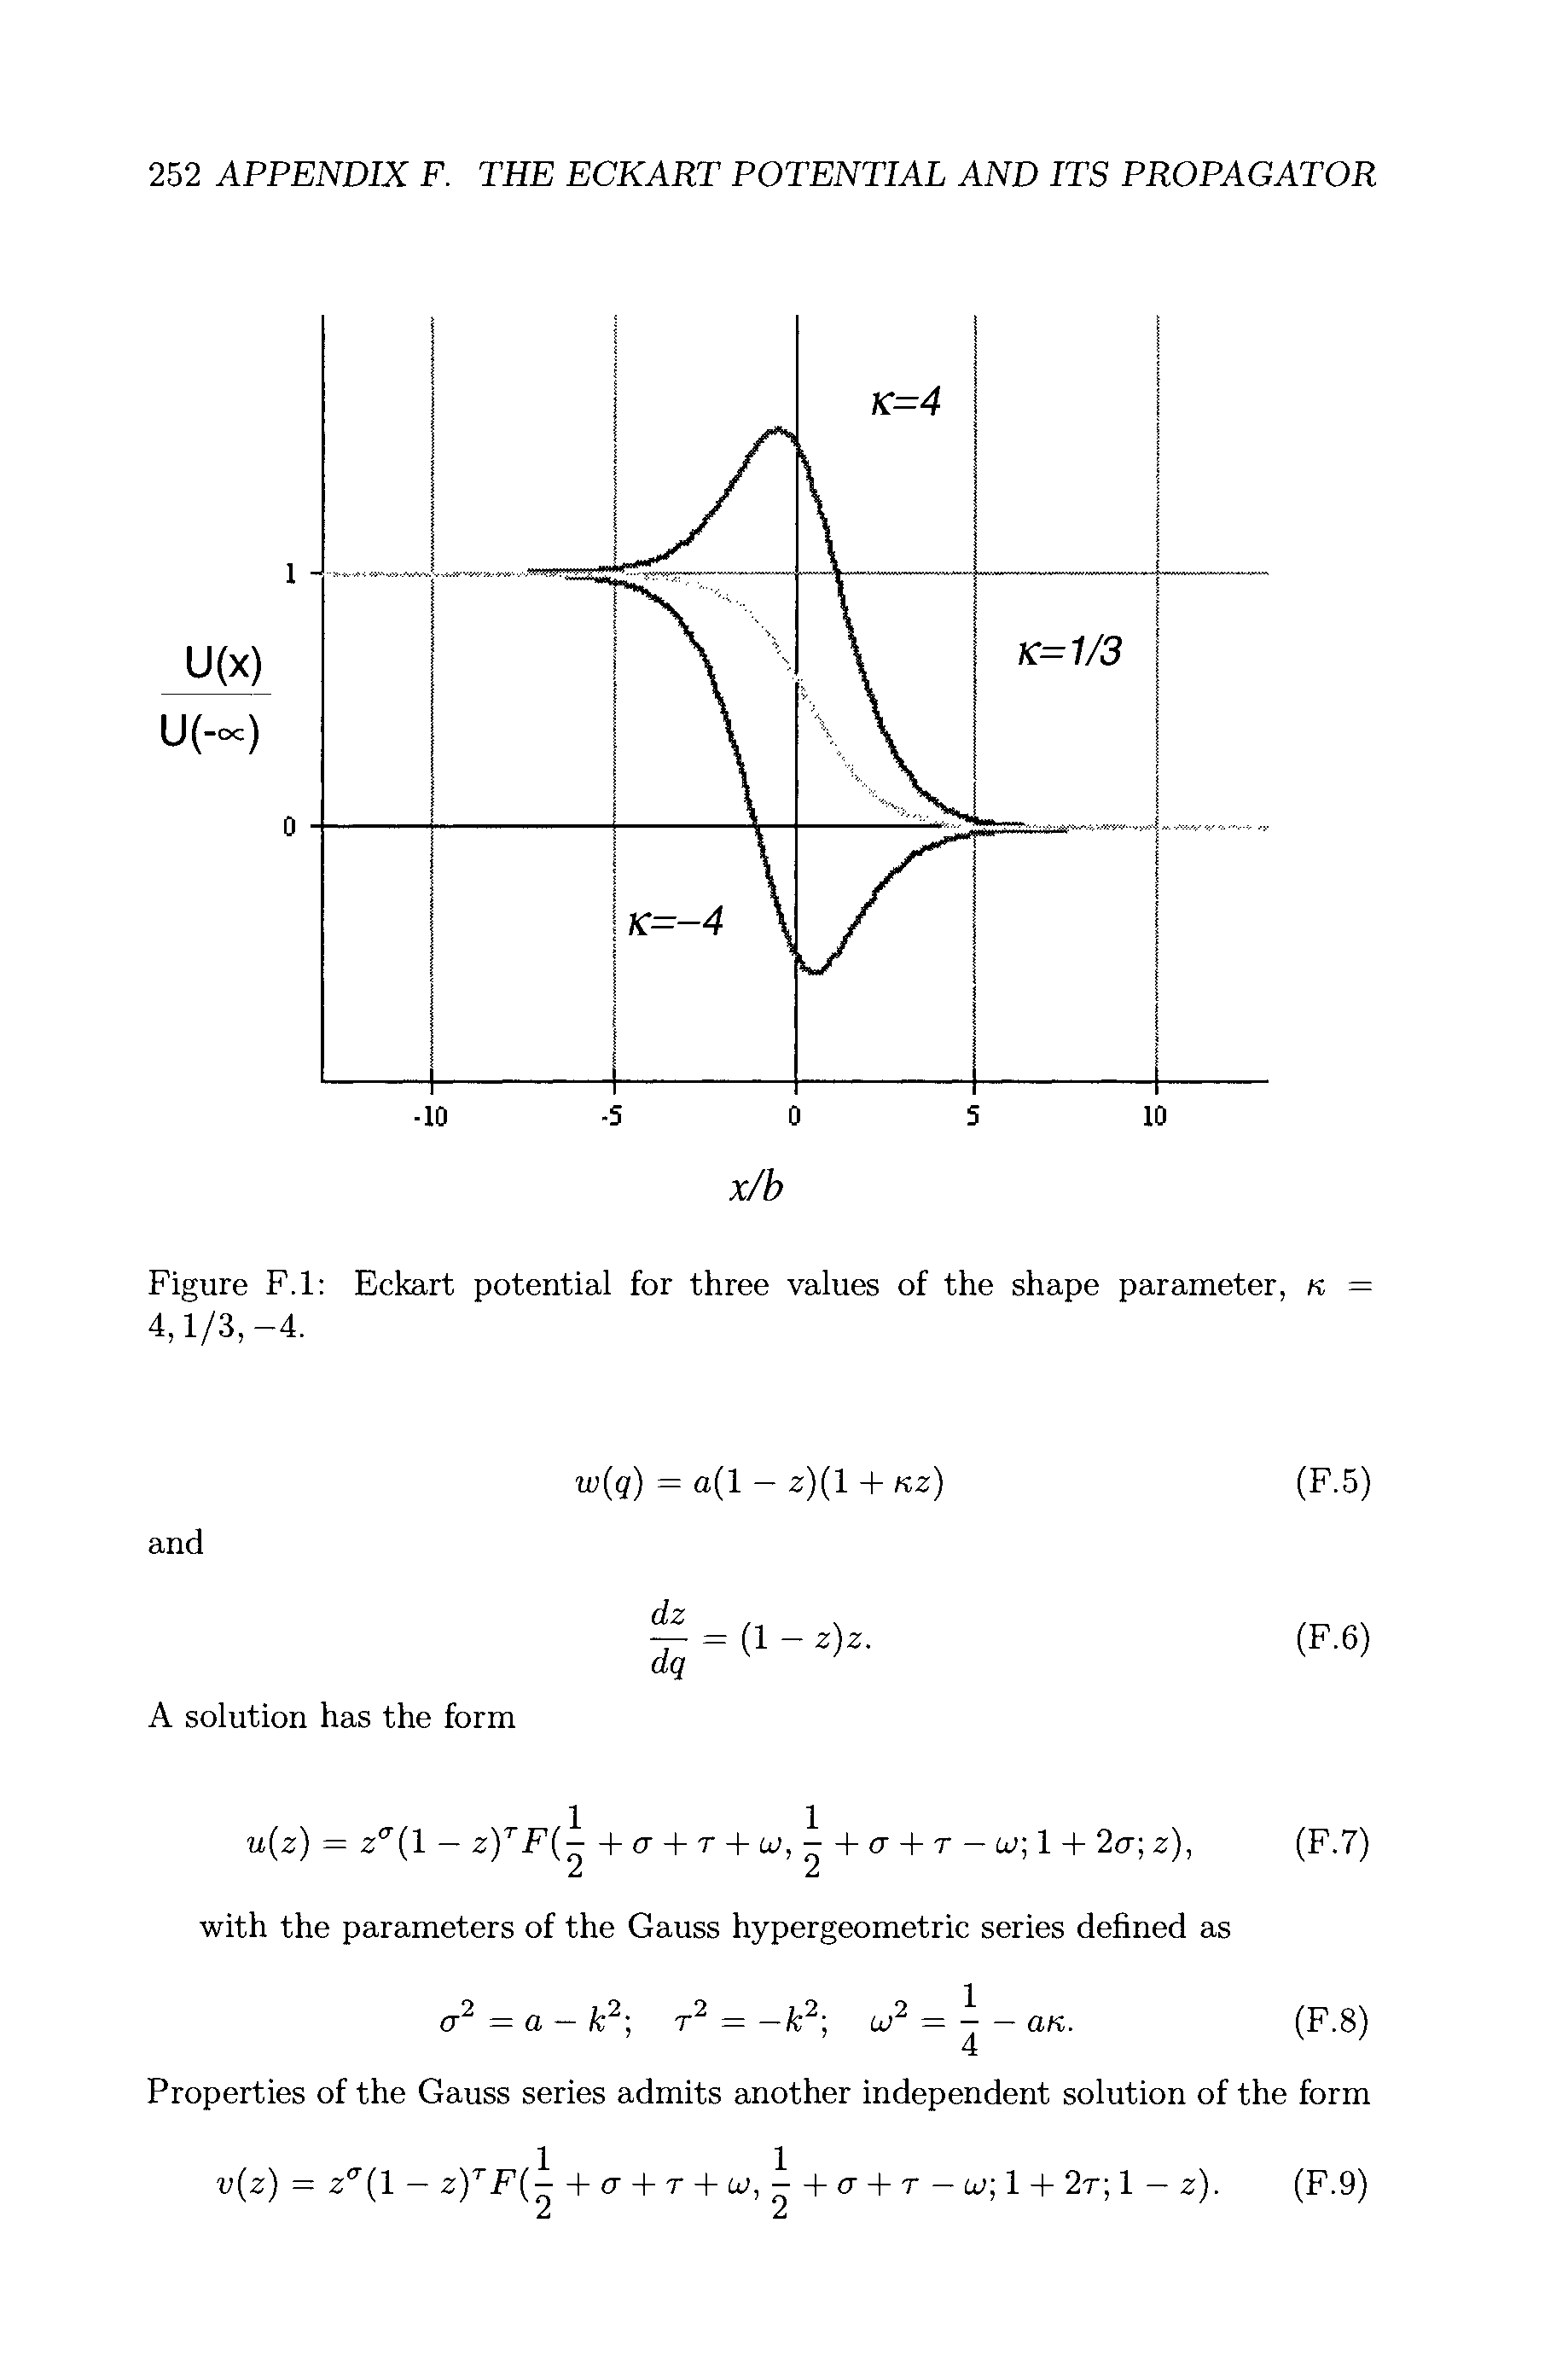 Figure F.l Eckart potential for three values of the shape parameter, k 4,1/3,-4.